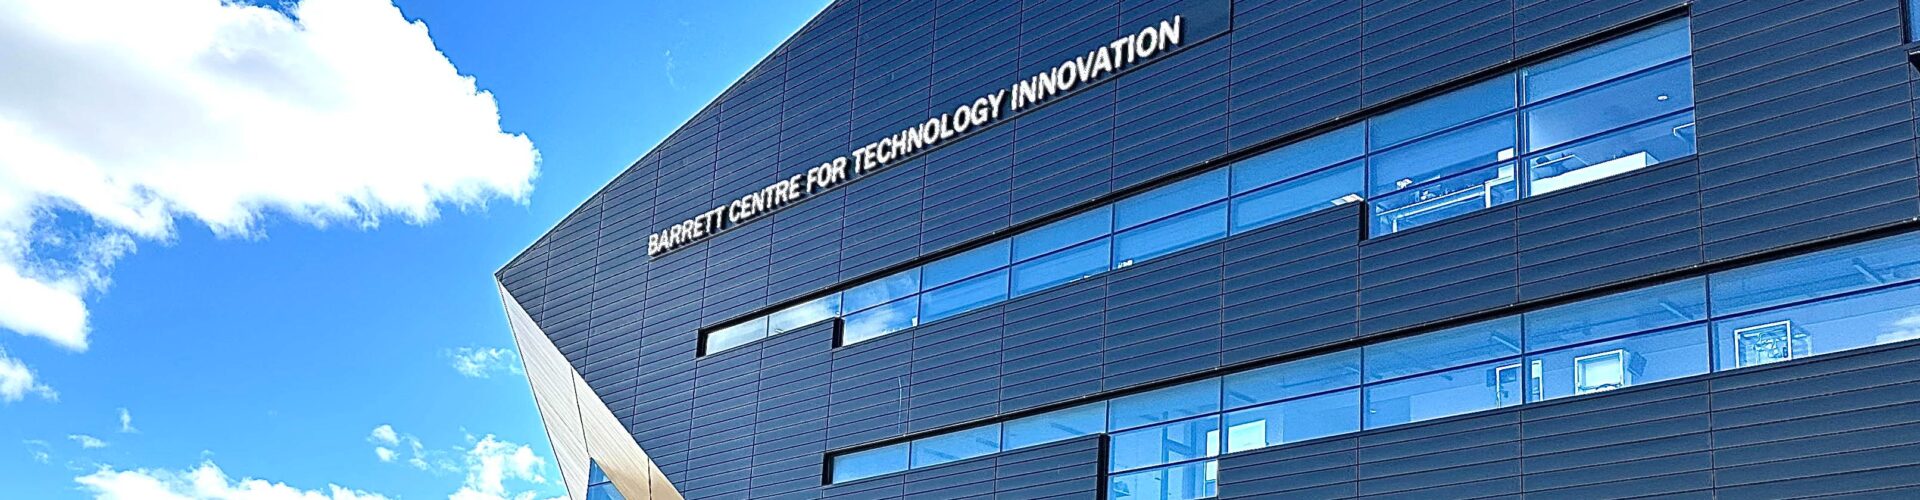 Humber seeks to push new tech with new program